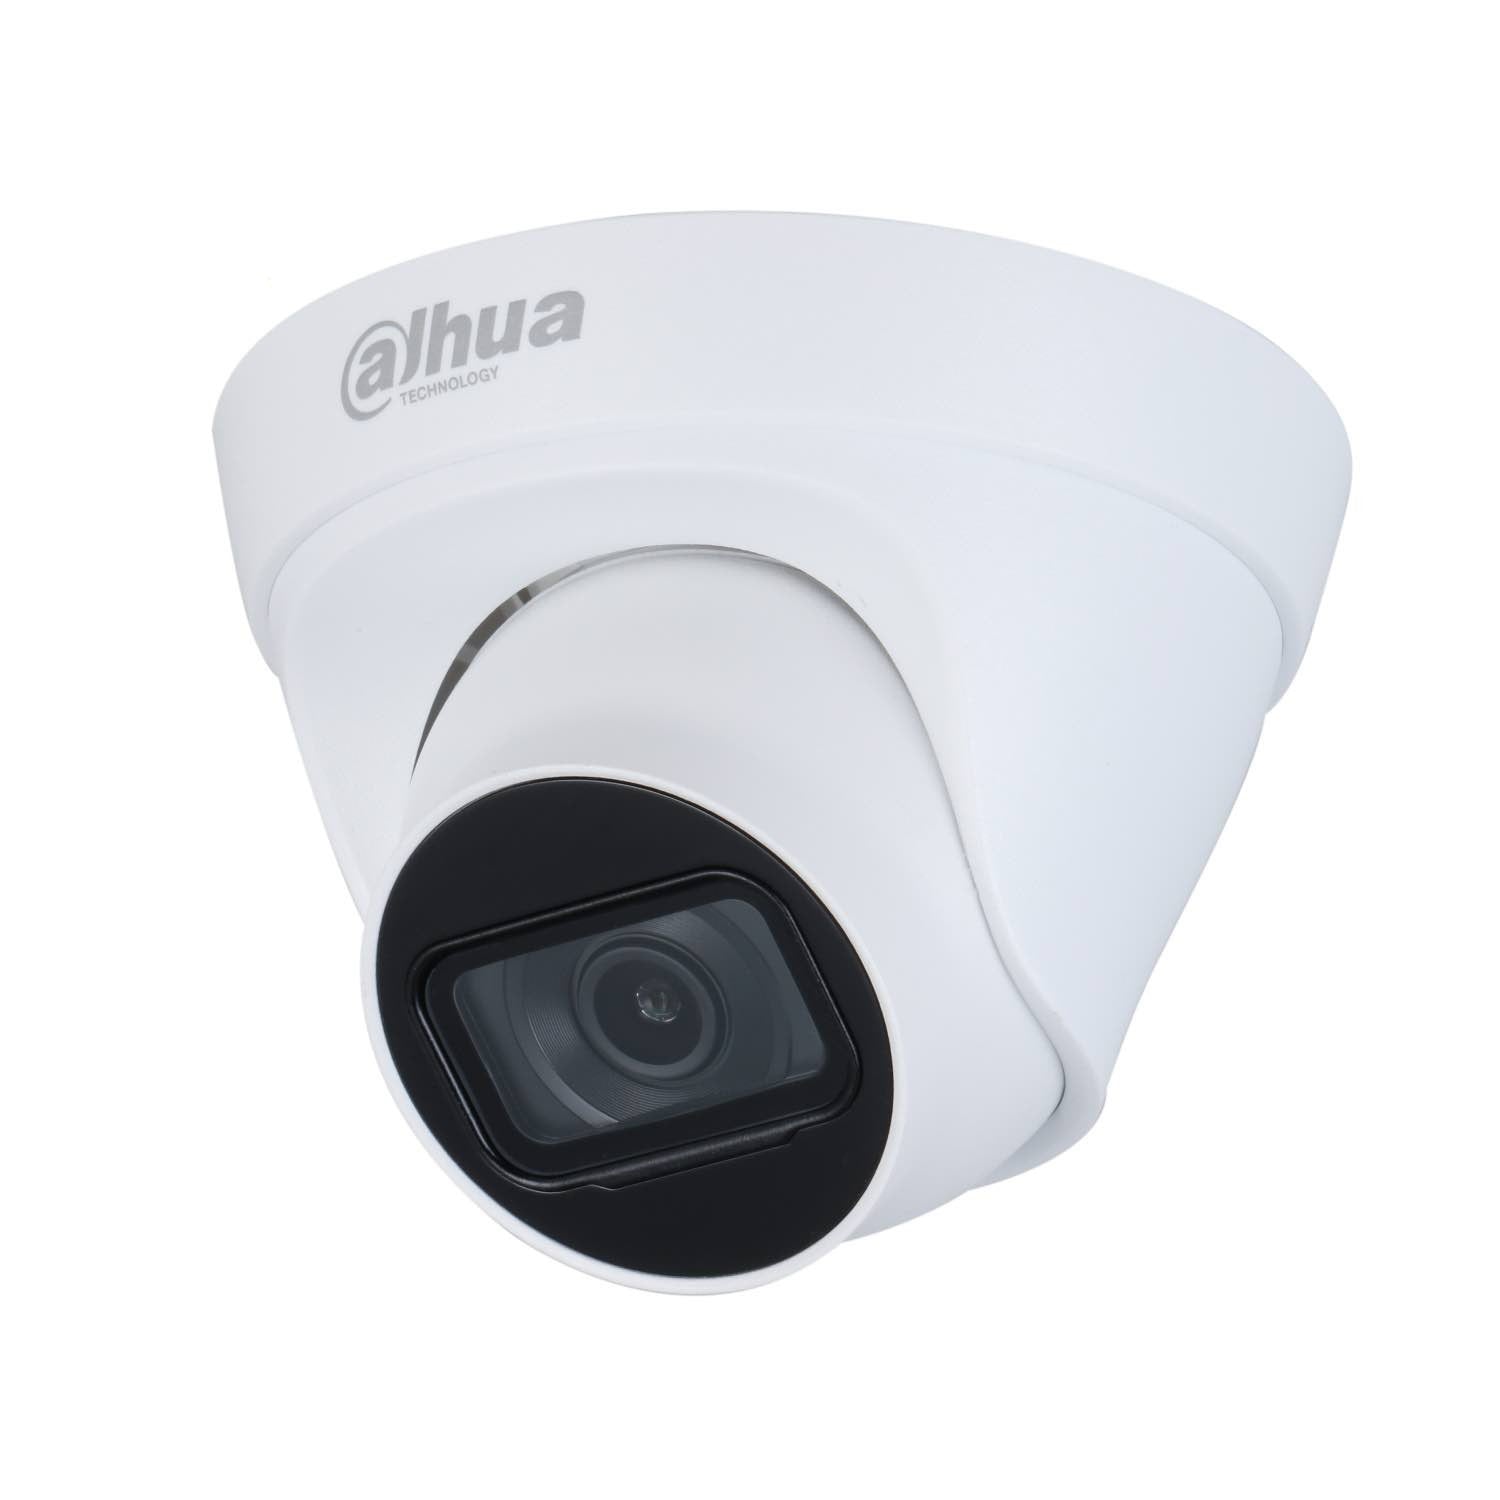 Dahua 2MP IP Network Dome Camera DH-IPC-HDW2230TP-AS-S2